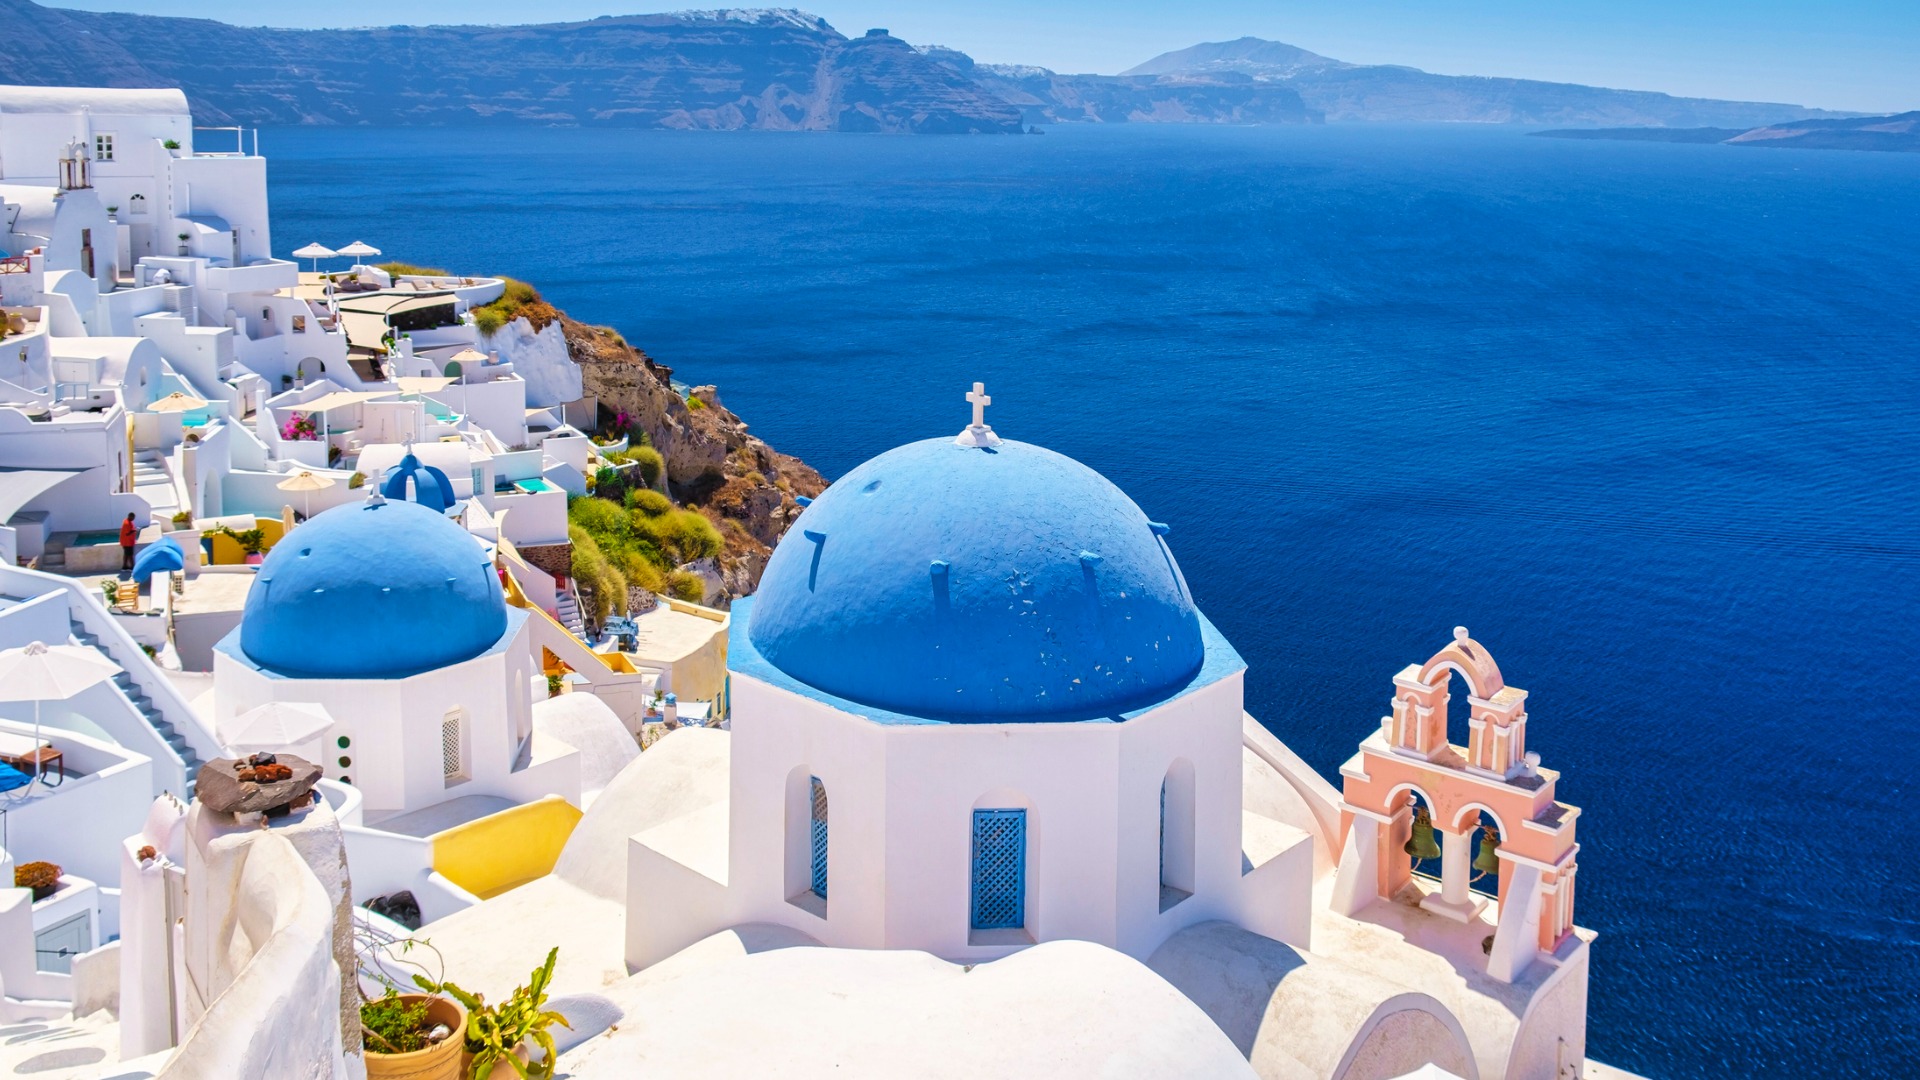 white-churches-an-blue-domes-by-the-ocean-of-oia-santorini-greece-traditional-greek-village